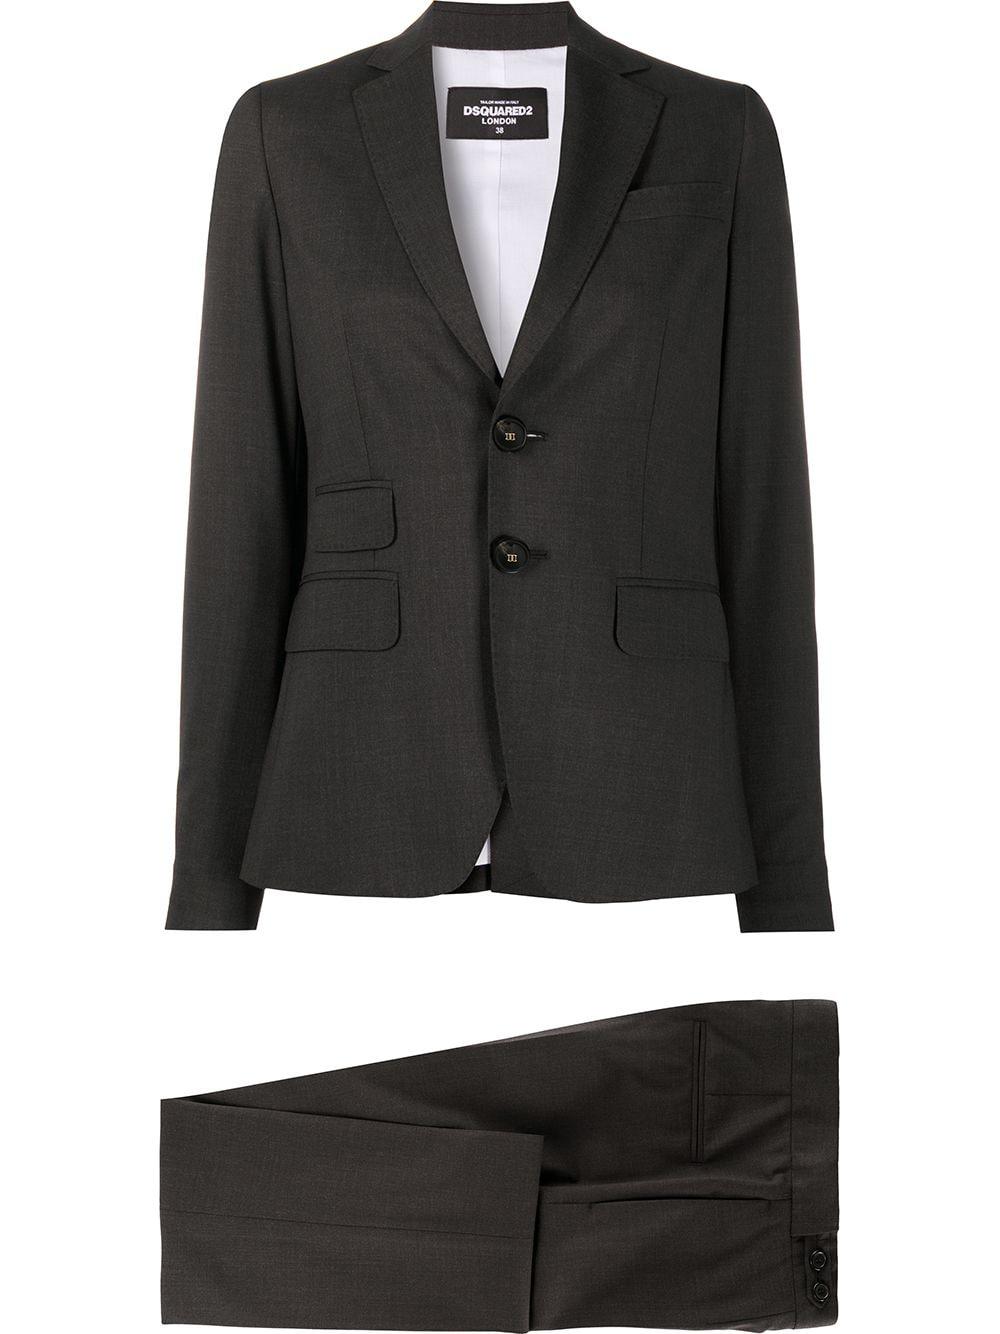 DSquared² Synthetic Single-breasted Trouser Suit in Grey (Gray) - Lyst